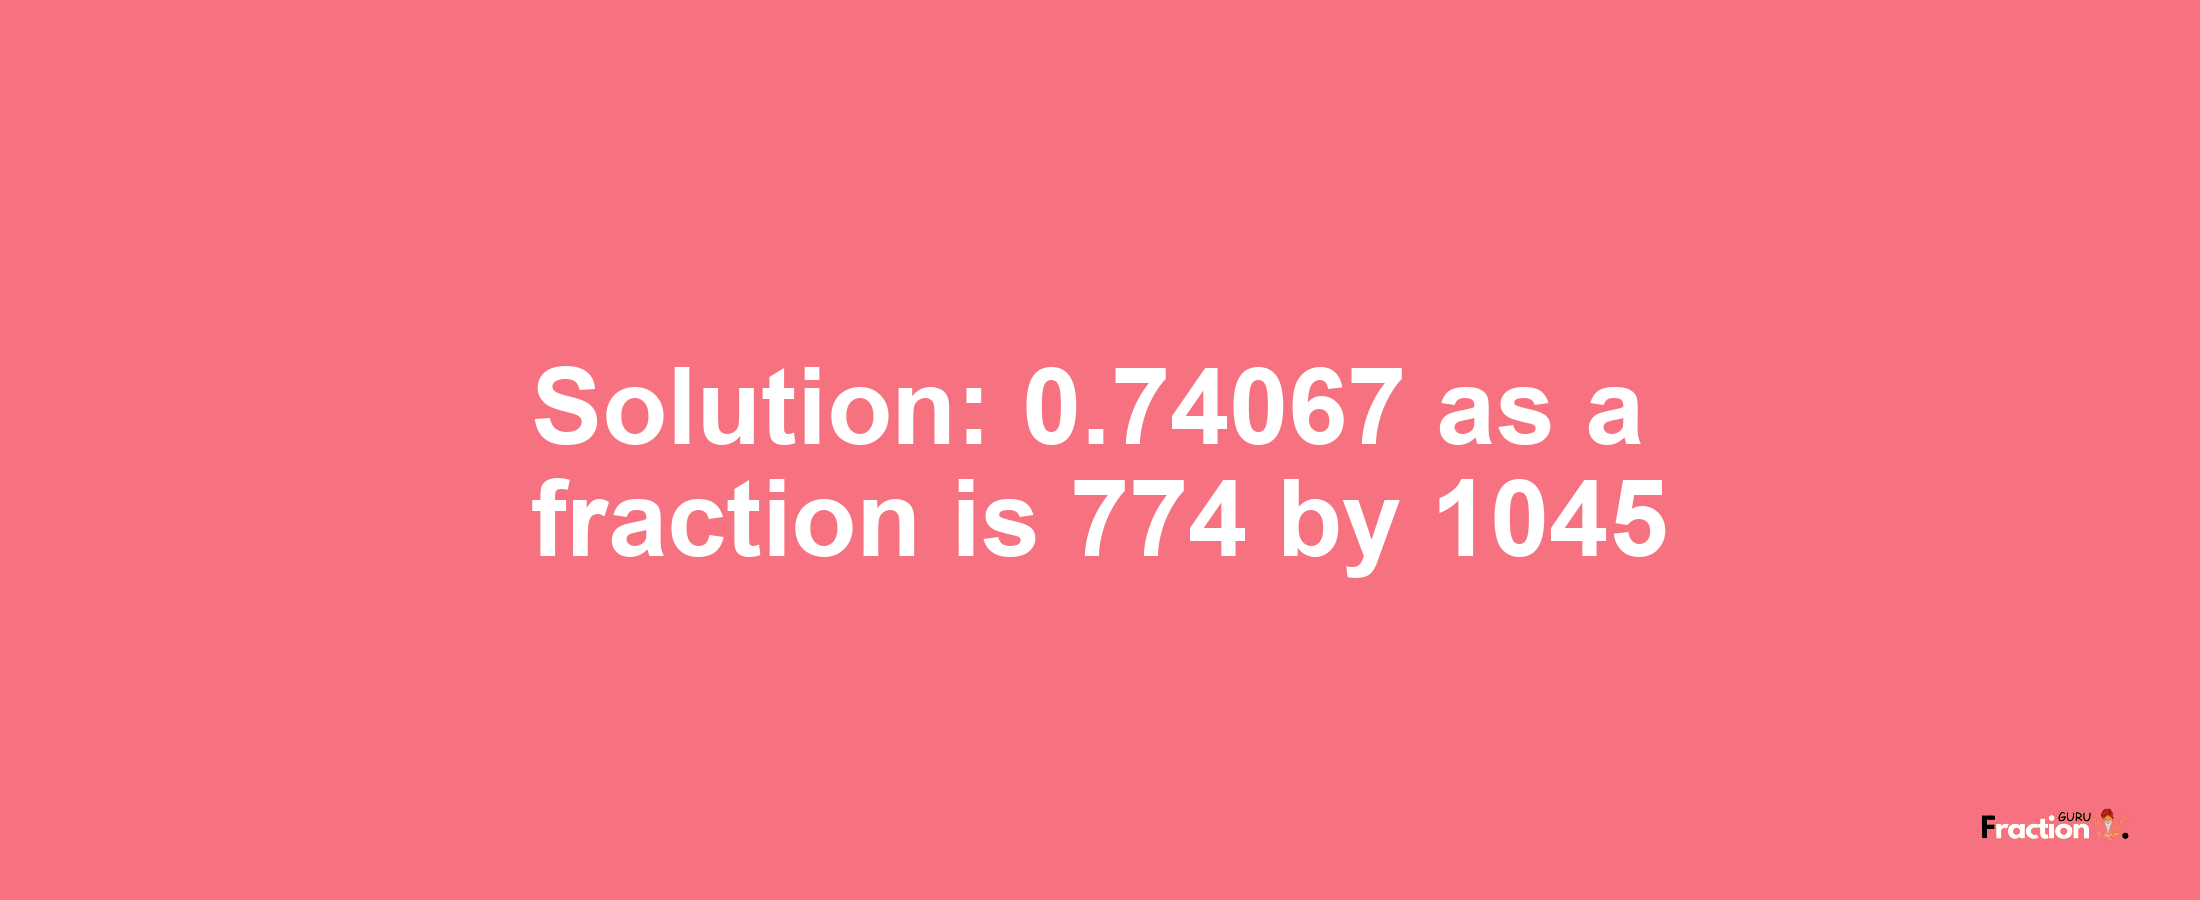 Solution:0.74067 as a fraction is 774/1045